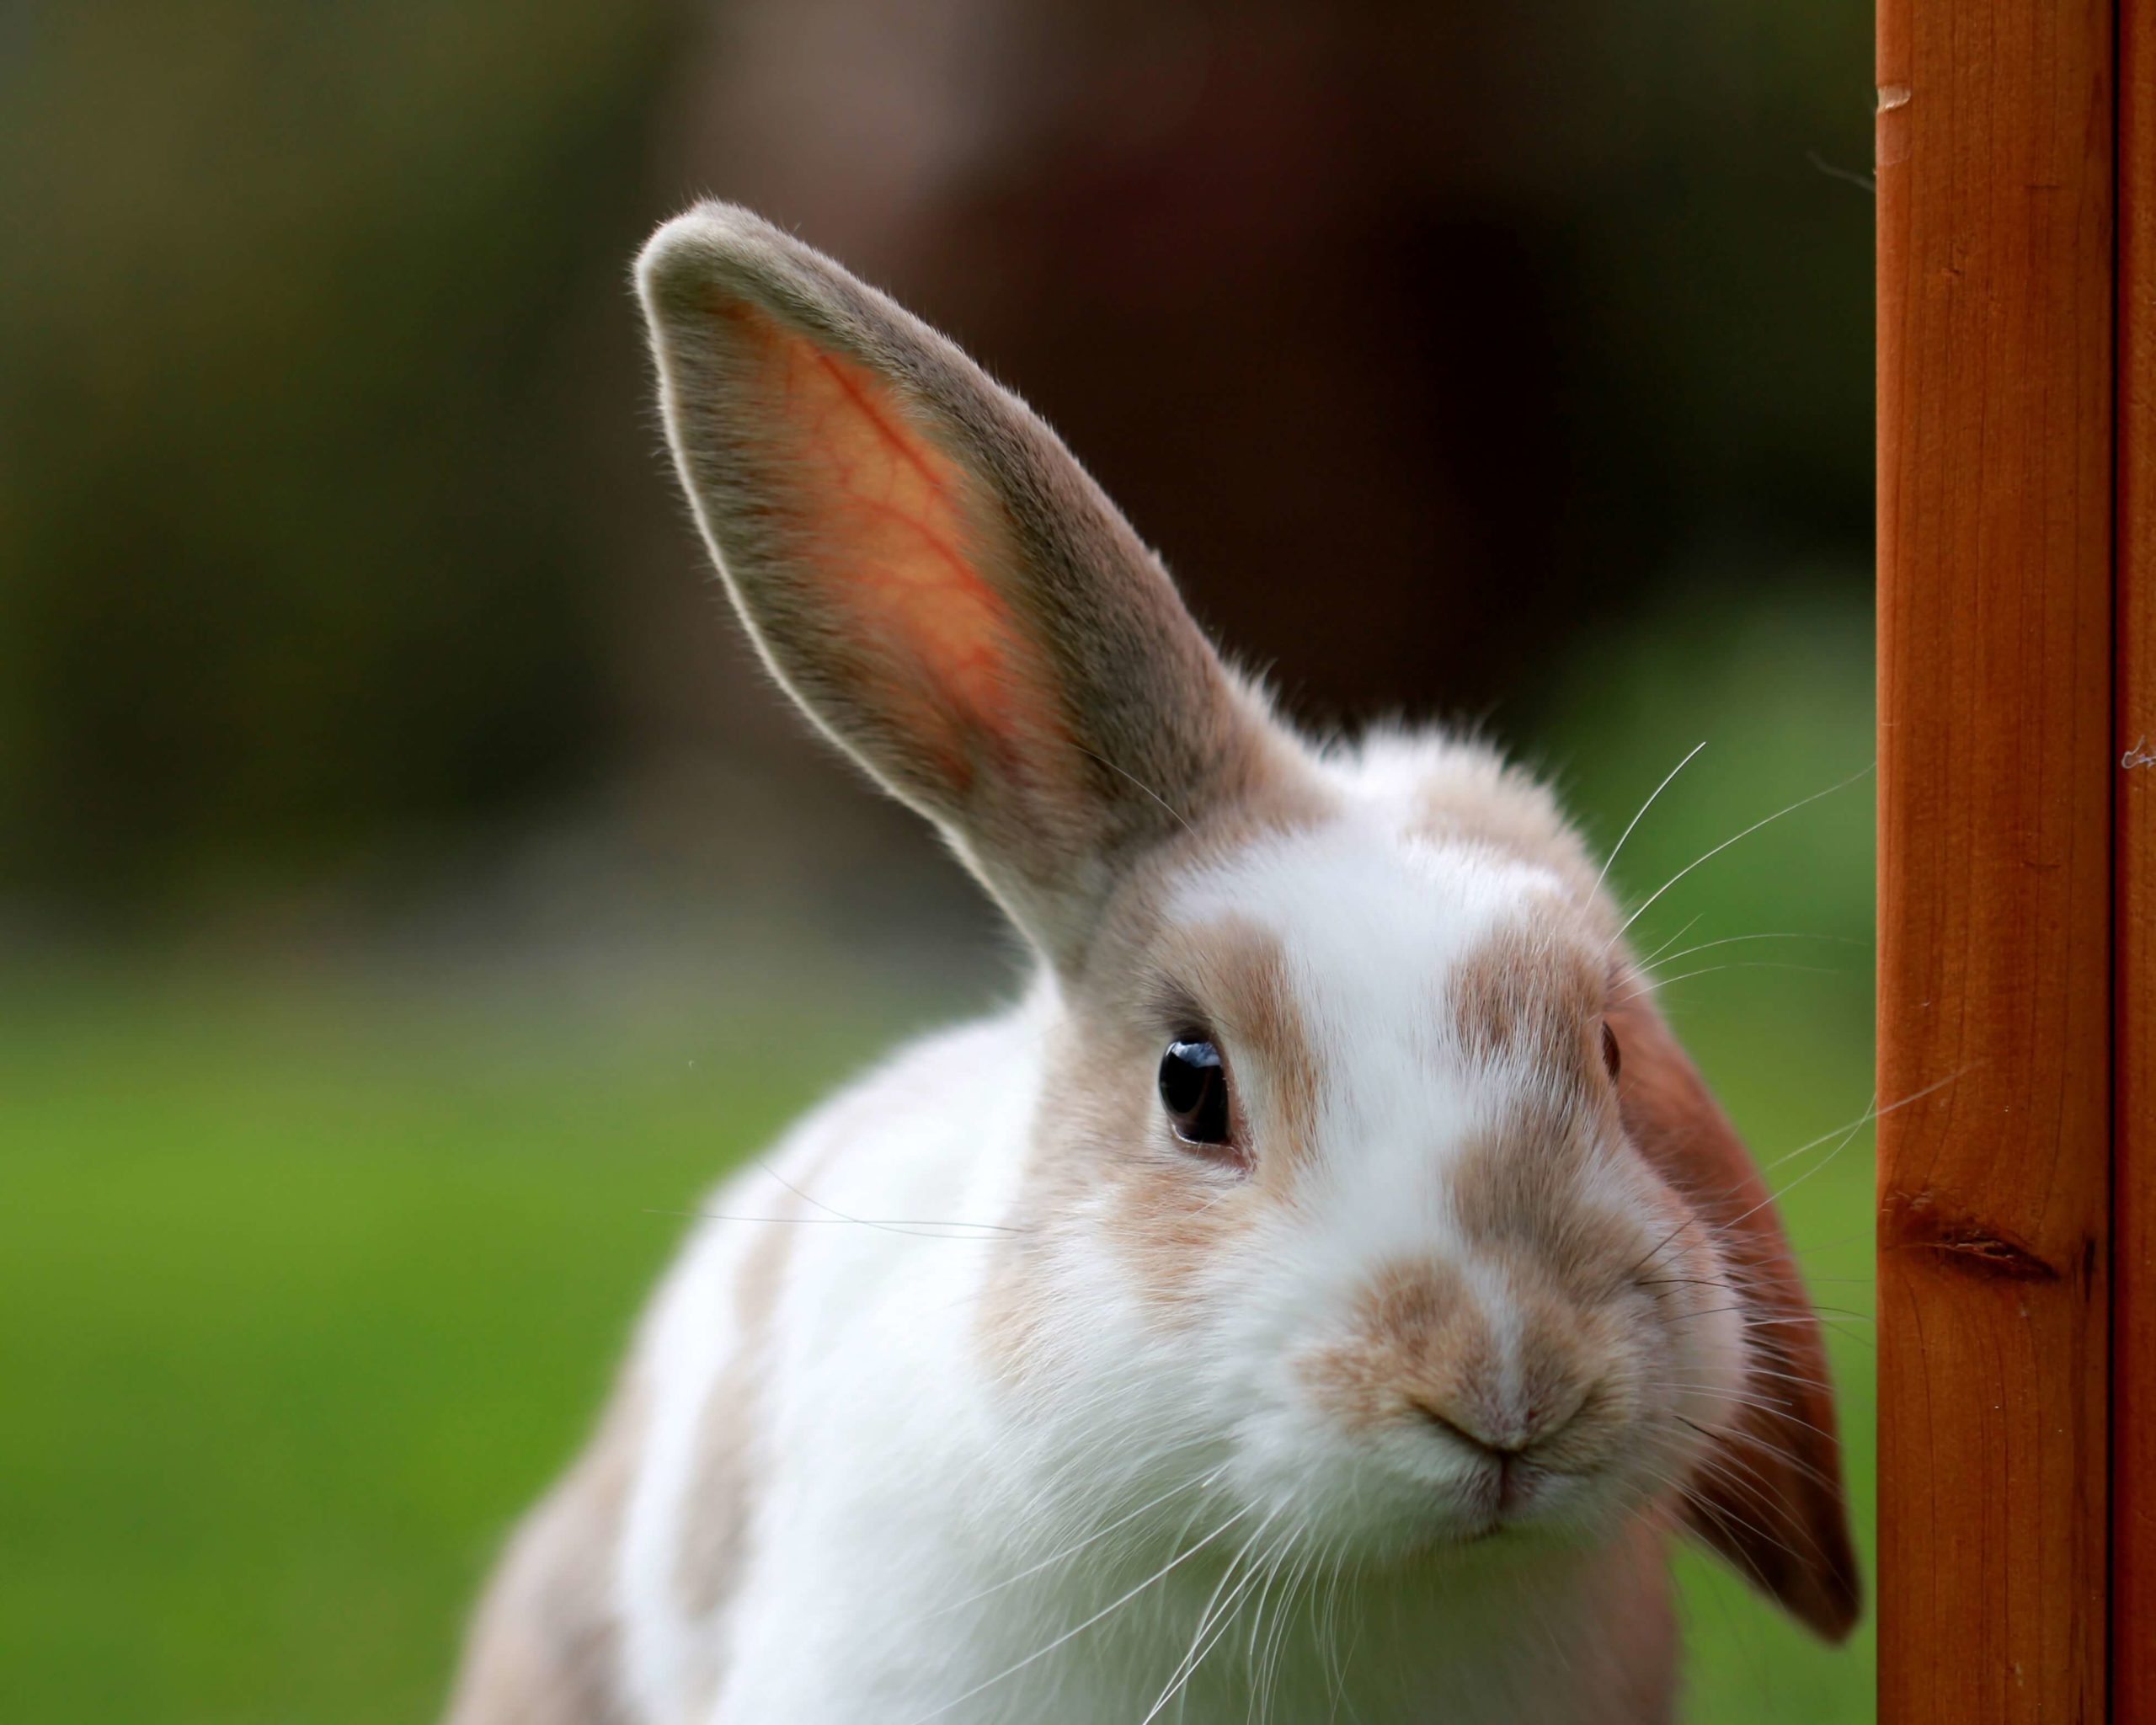 How EGGcellent is a bunny's hearing? - Hearing Sense